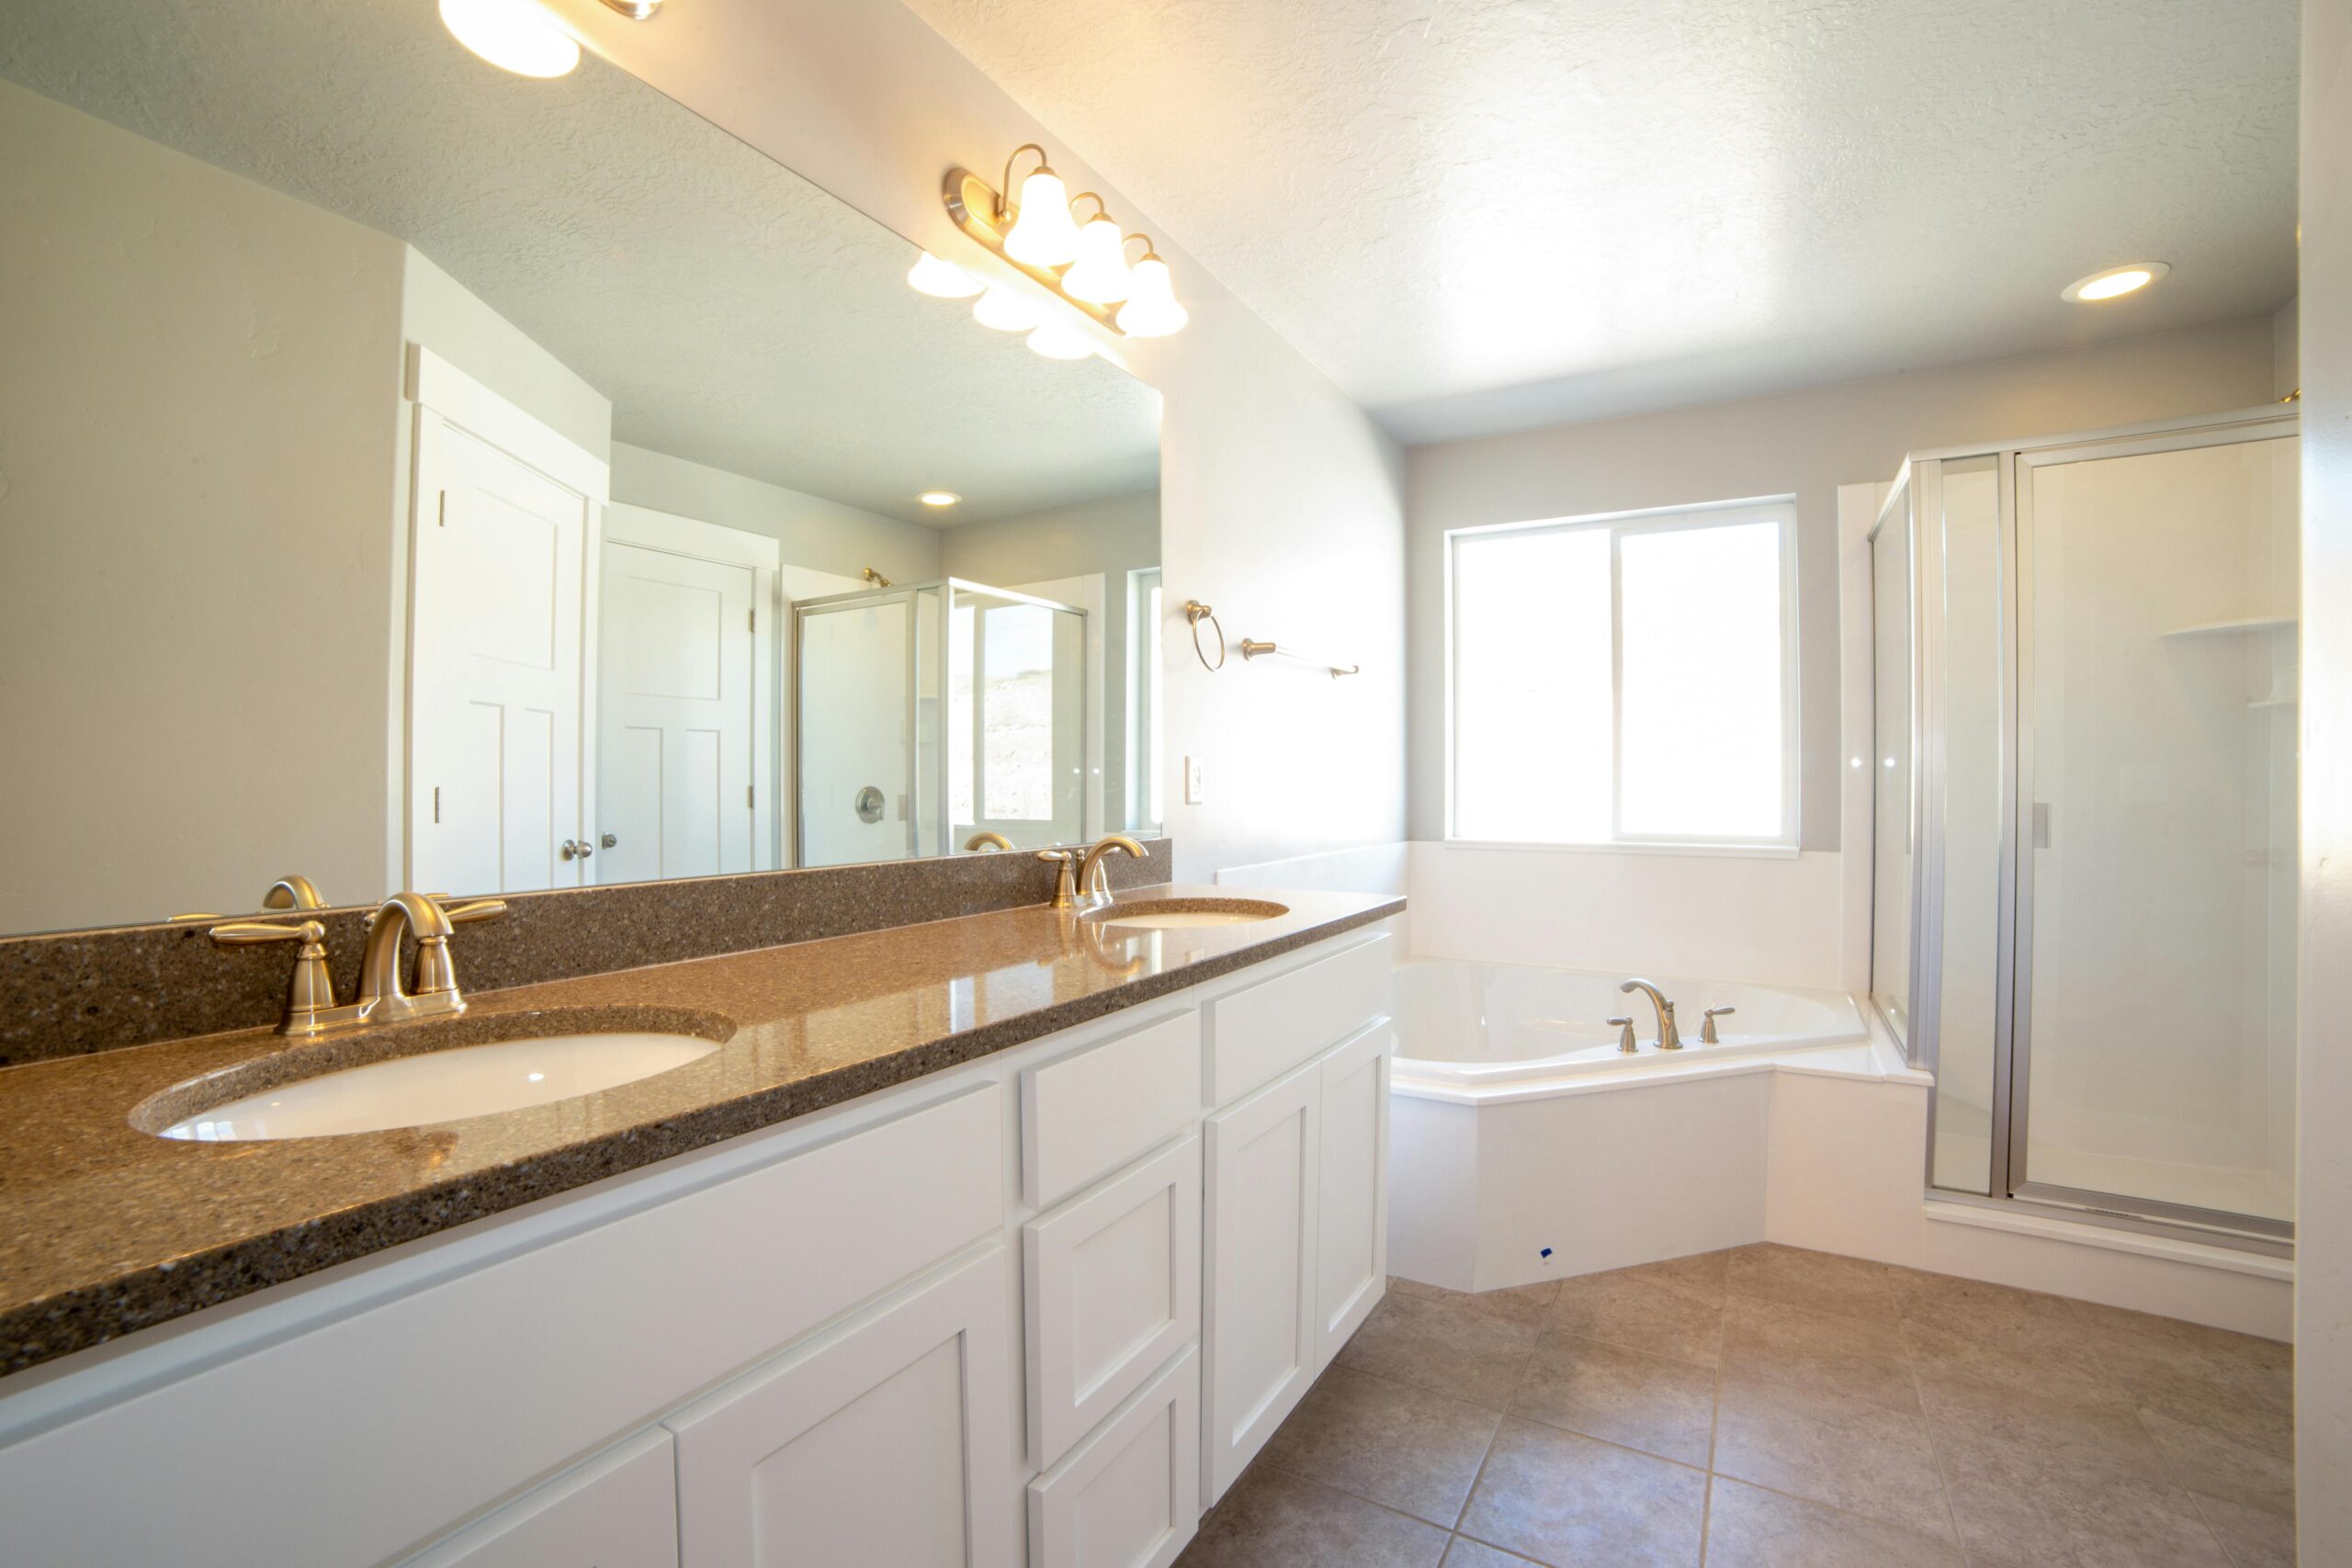 6 Reasons Bathroom Remodeling Should Only Be Done by The Pros